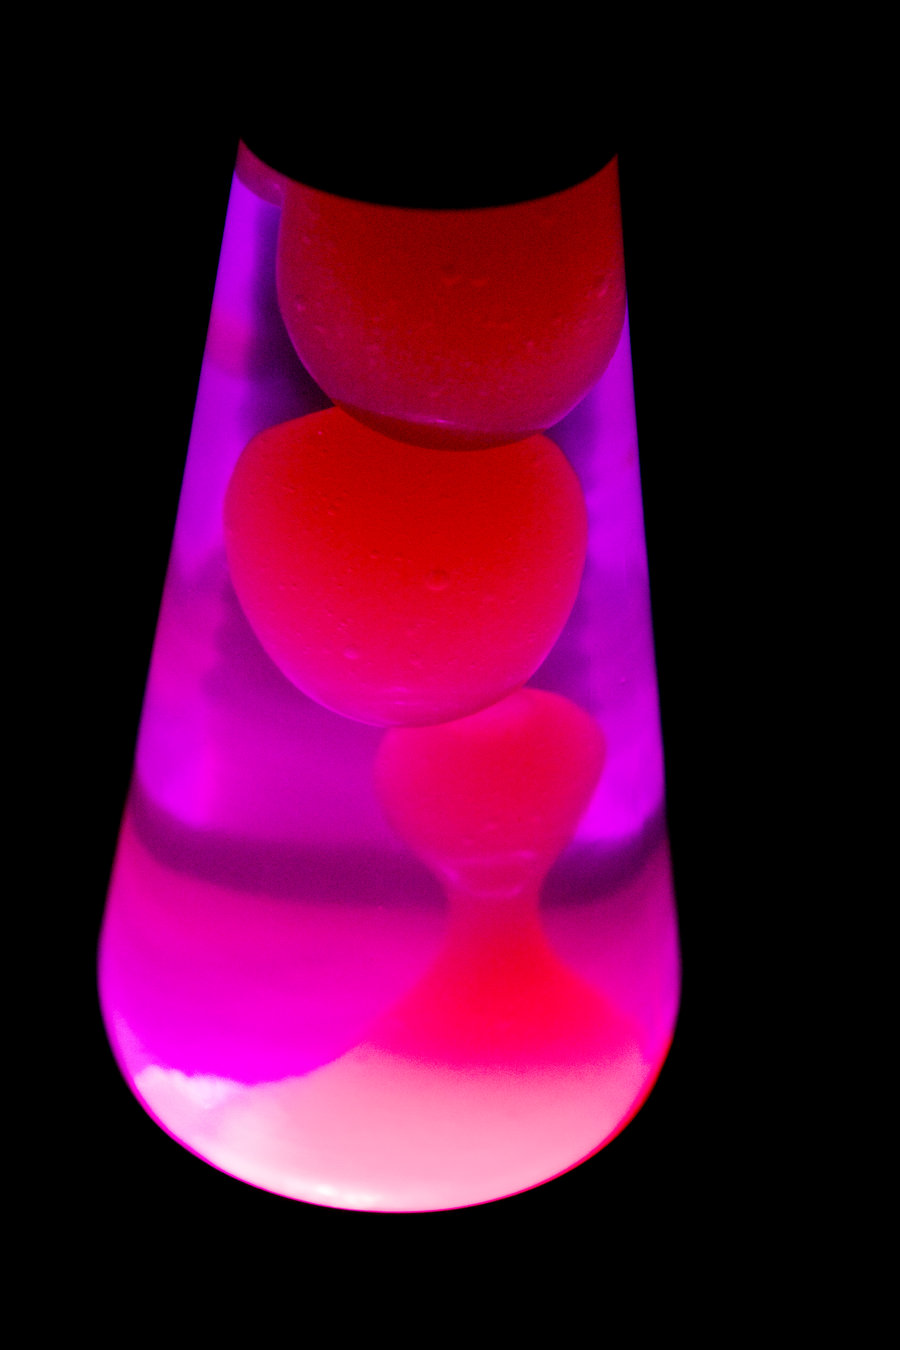 Lava Lamp Live Wallpapers